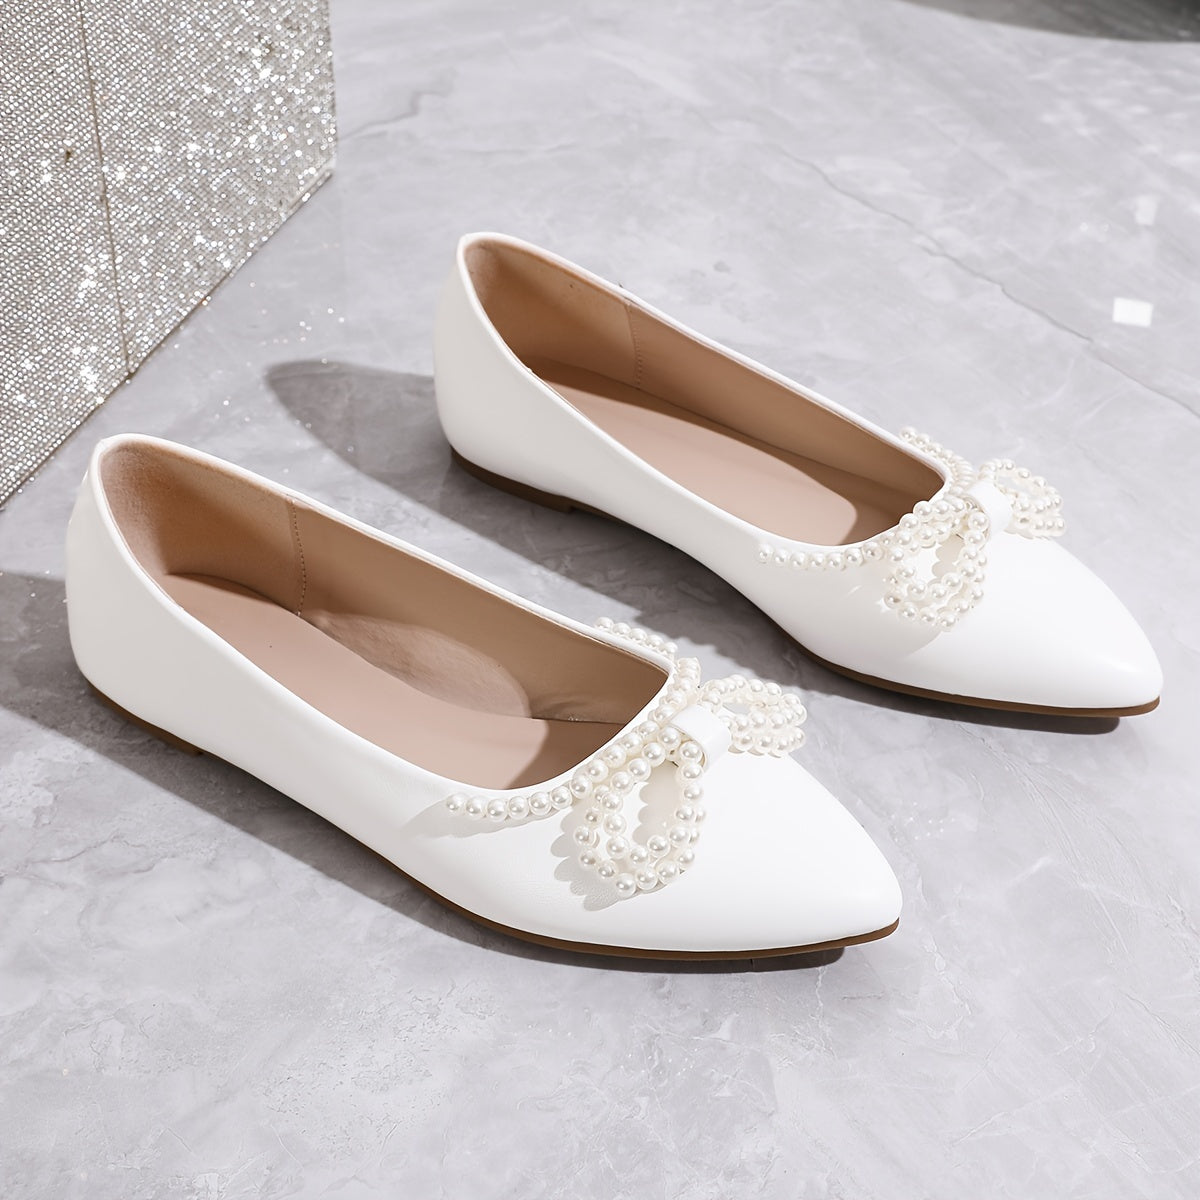 Women's Flat Shoes With Faux Pearl Bow, Pointed Toe Slip On Shallow Mouth Dressy Flats, Breathable Daily Elegant Shoes